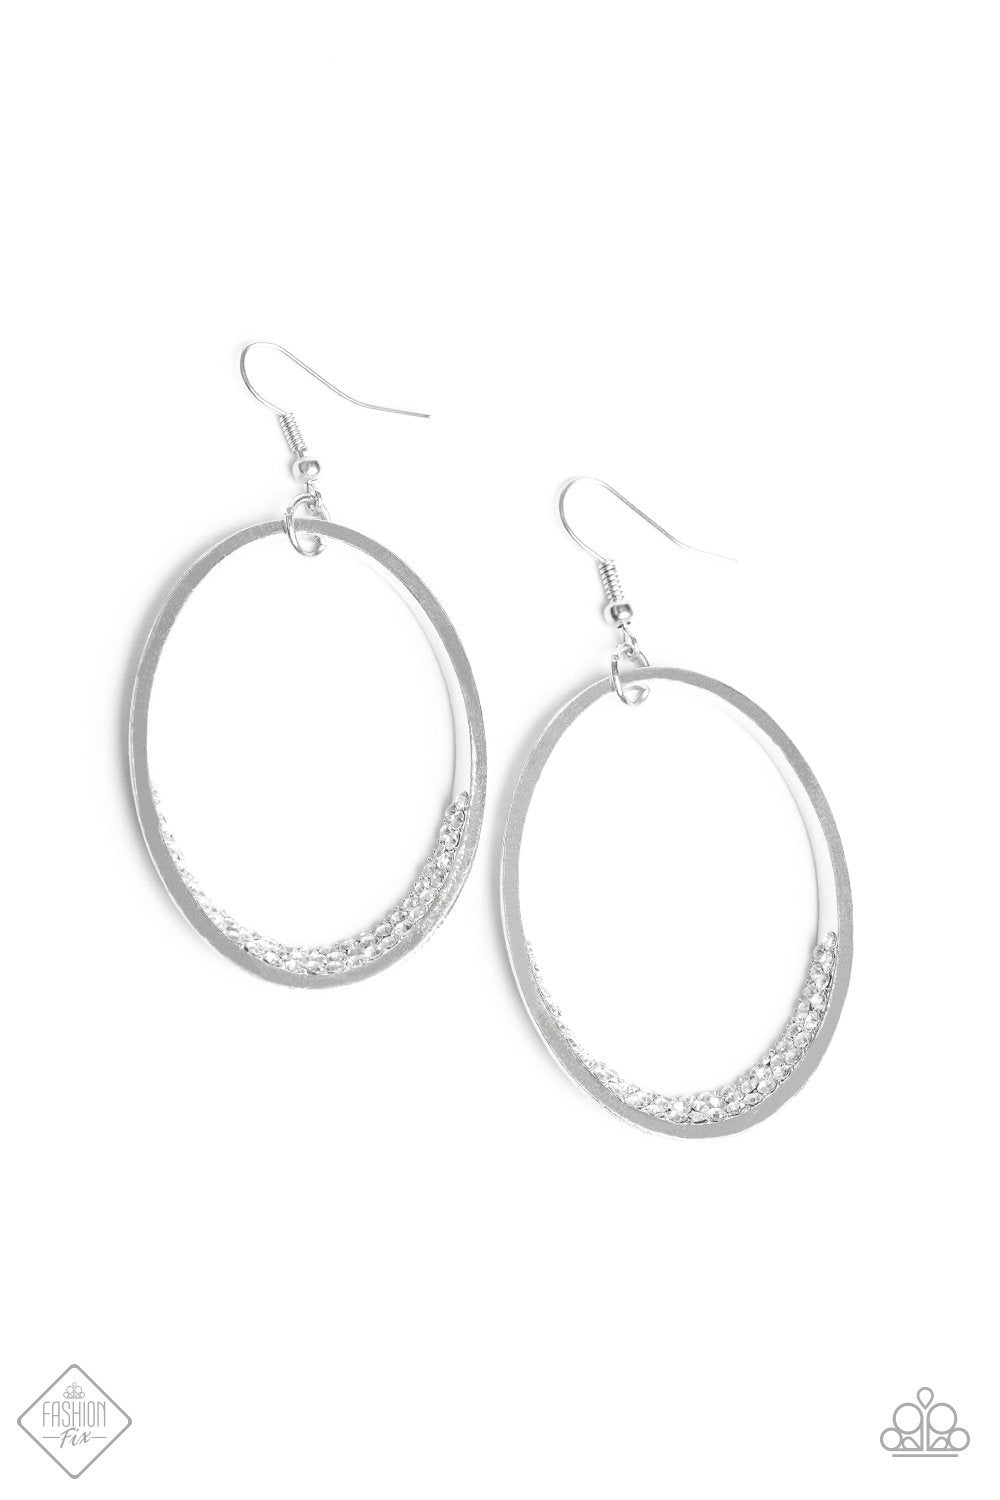 Must Love Sparkle Silver and White Rhinestone Earrings - Paparazzi Accessories-CarasShop.com - $5 Jewelry by Cara Jewels